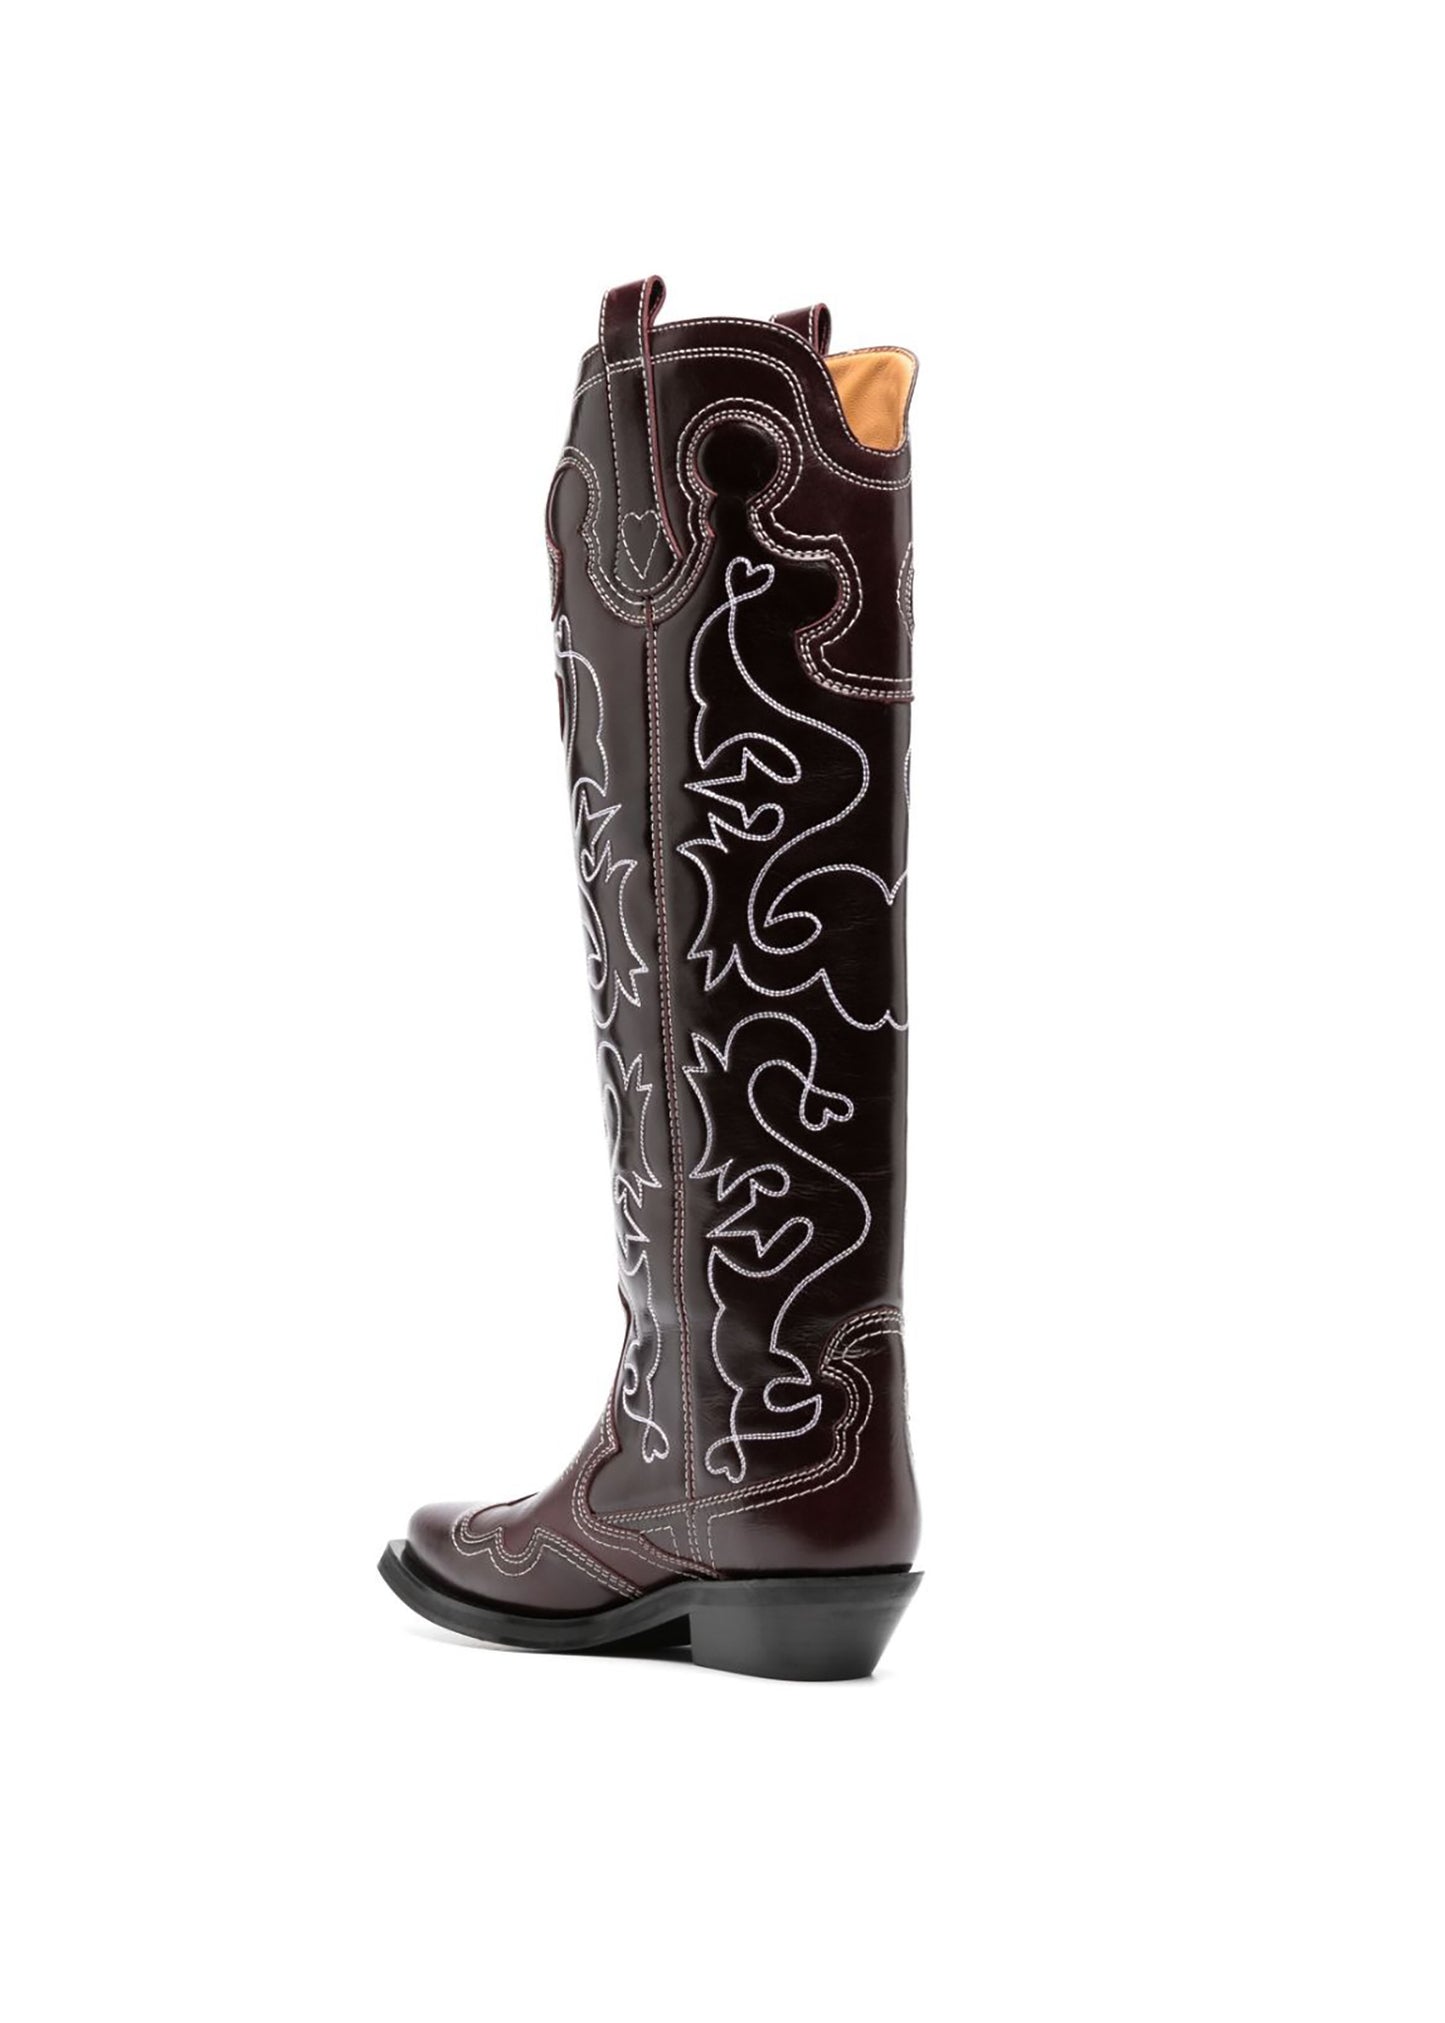 Western Knee High Embroidered Boot